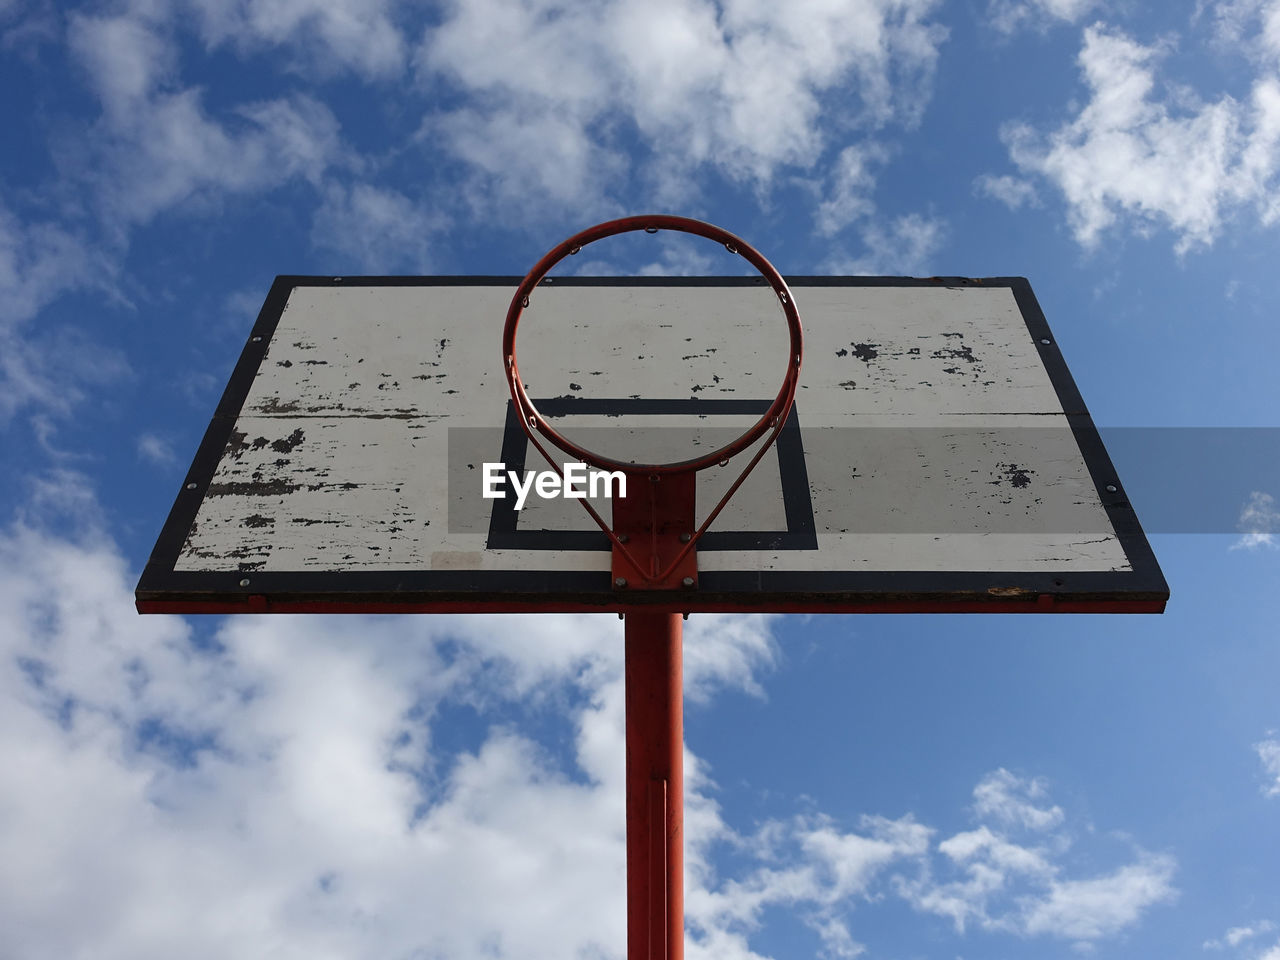 Basketball hoop on an outdoor court with sky and clouds background